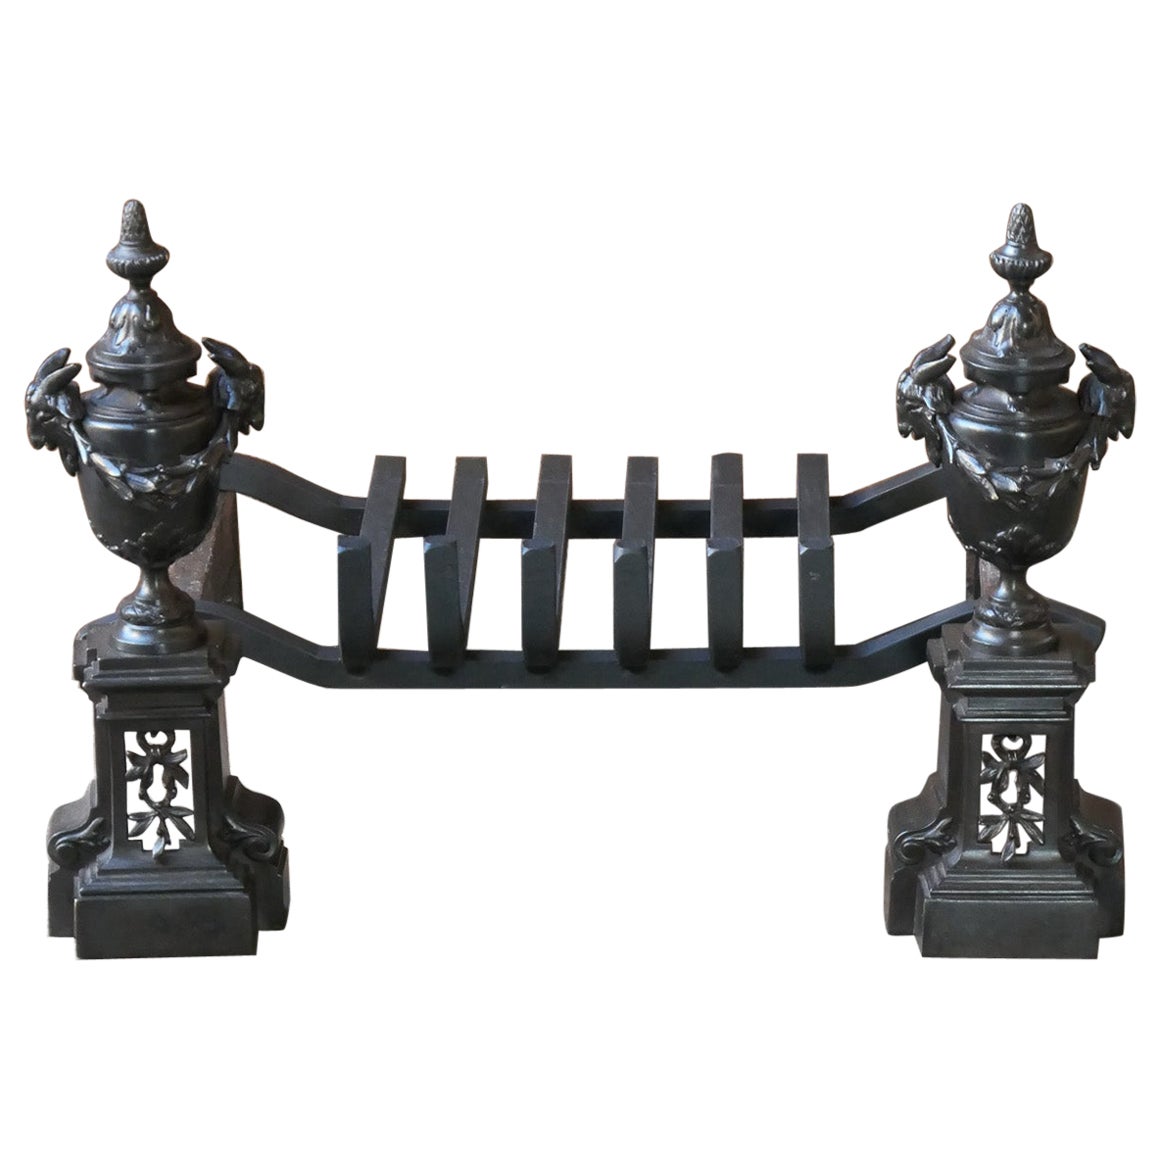 18th-19th Century French Neoclassical Fireplace Grate or Fire Grate For Sale